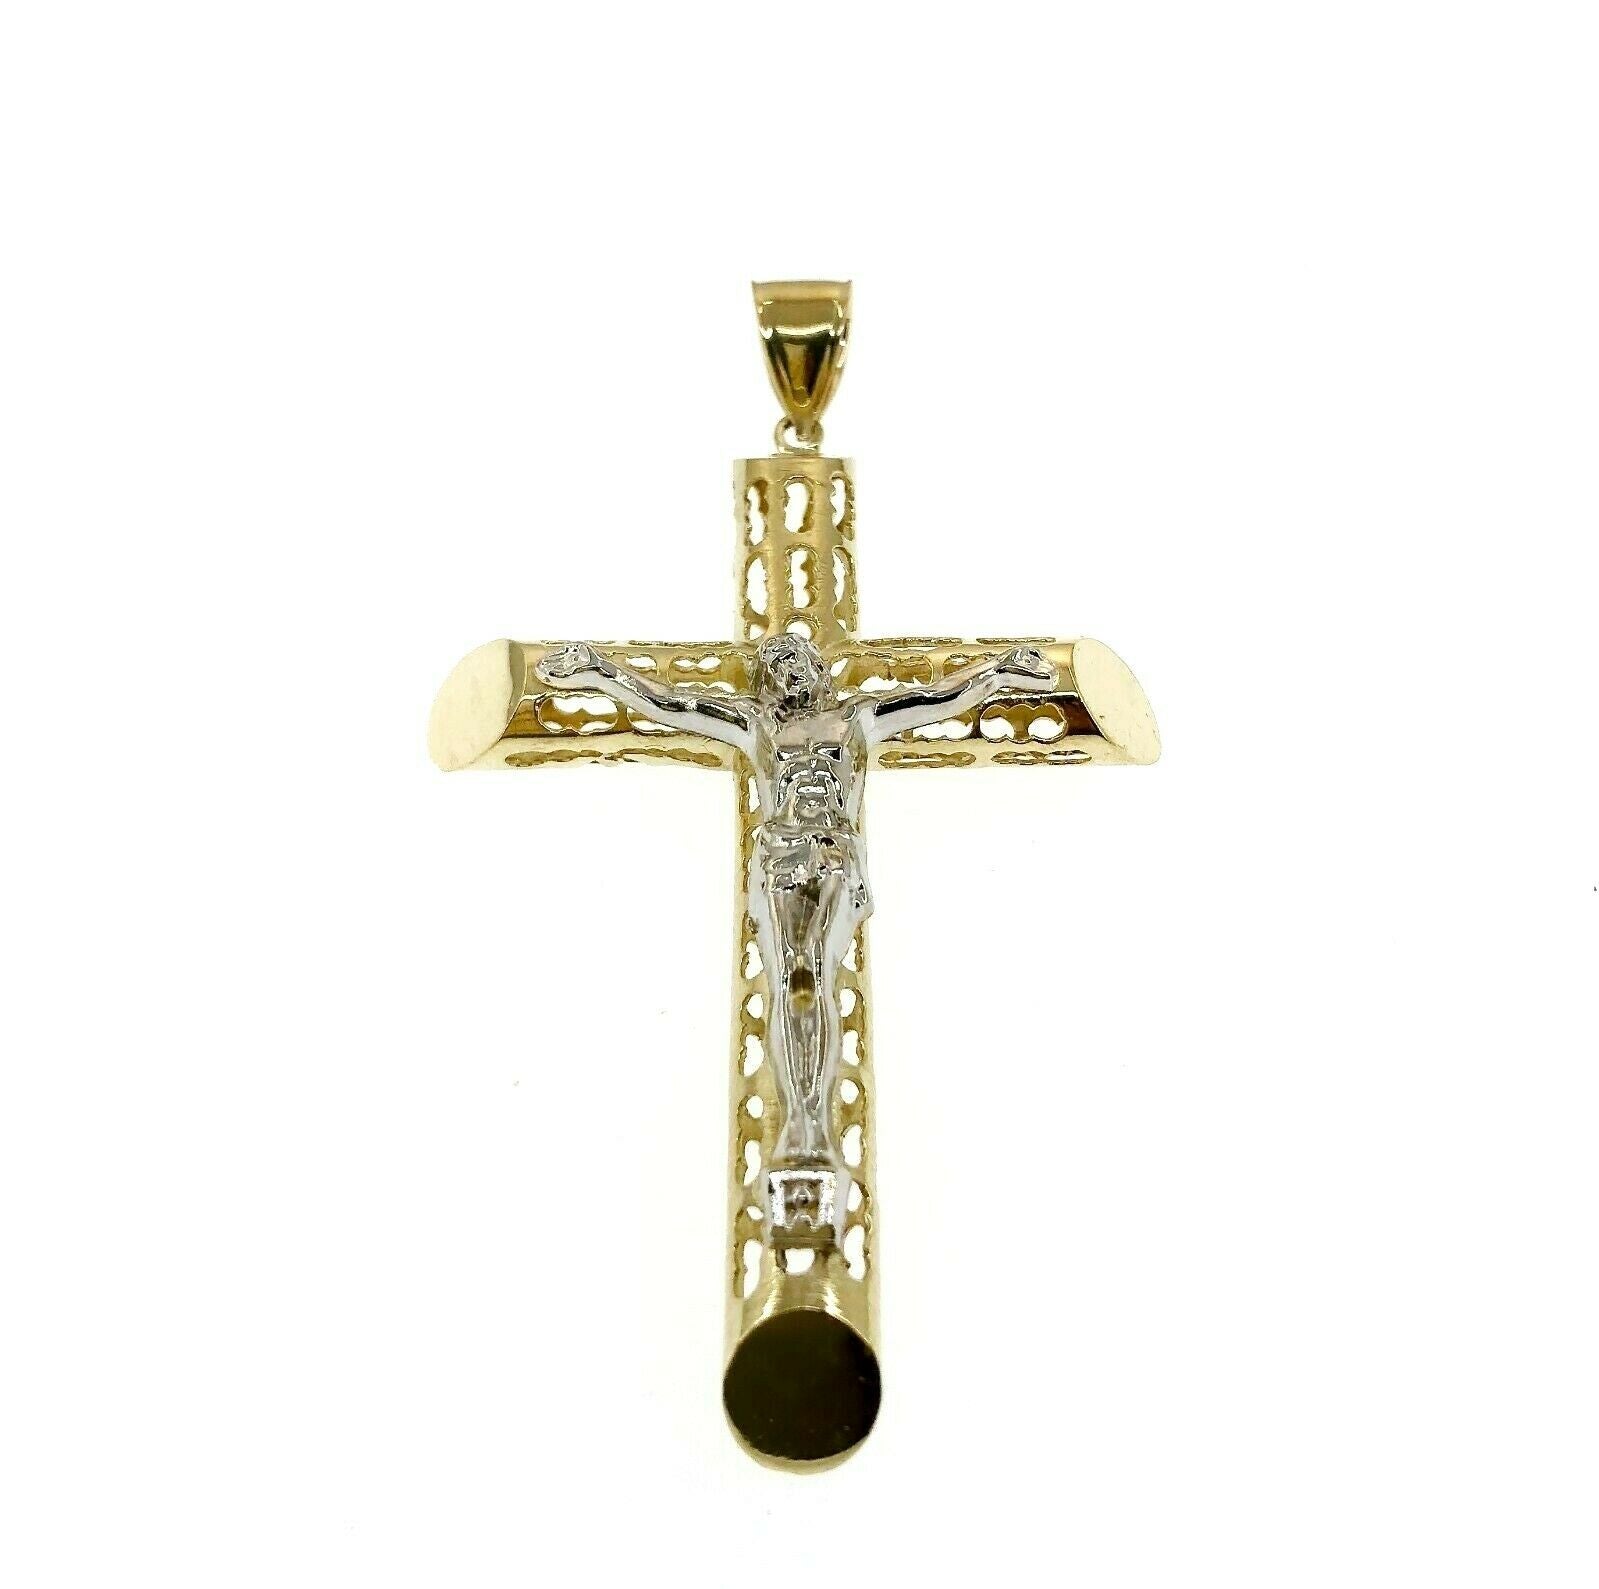 Custom Made Crucifix Cross Pendant Solid 14K Two Tone Gold 3.50 x 2.10 Inches